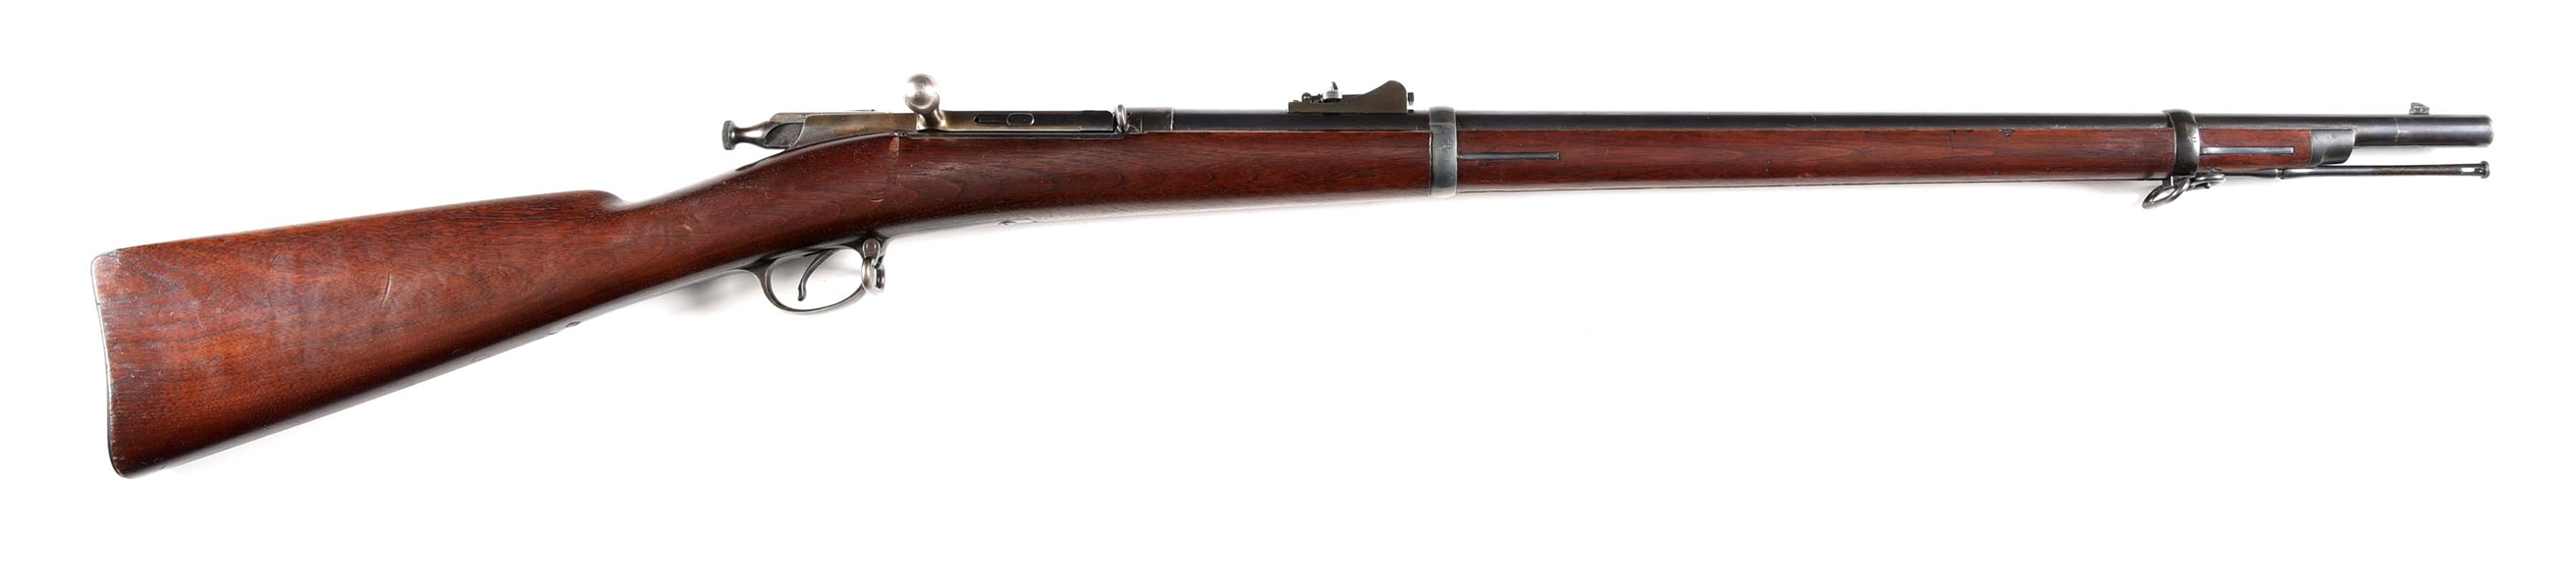 (A) SCARCE US SPRINGFIELD MODEL 1882 CHAFFEE-REESE BOLT ACTION RIFLE DATED 1884.